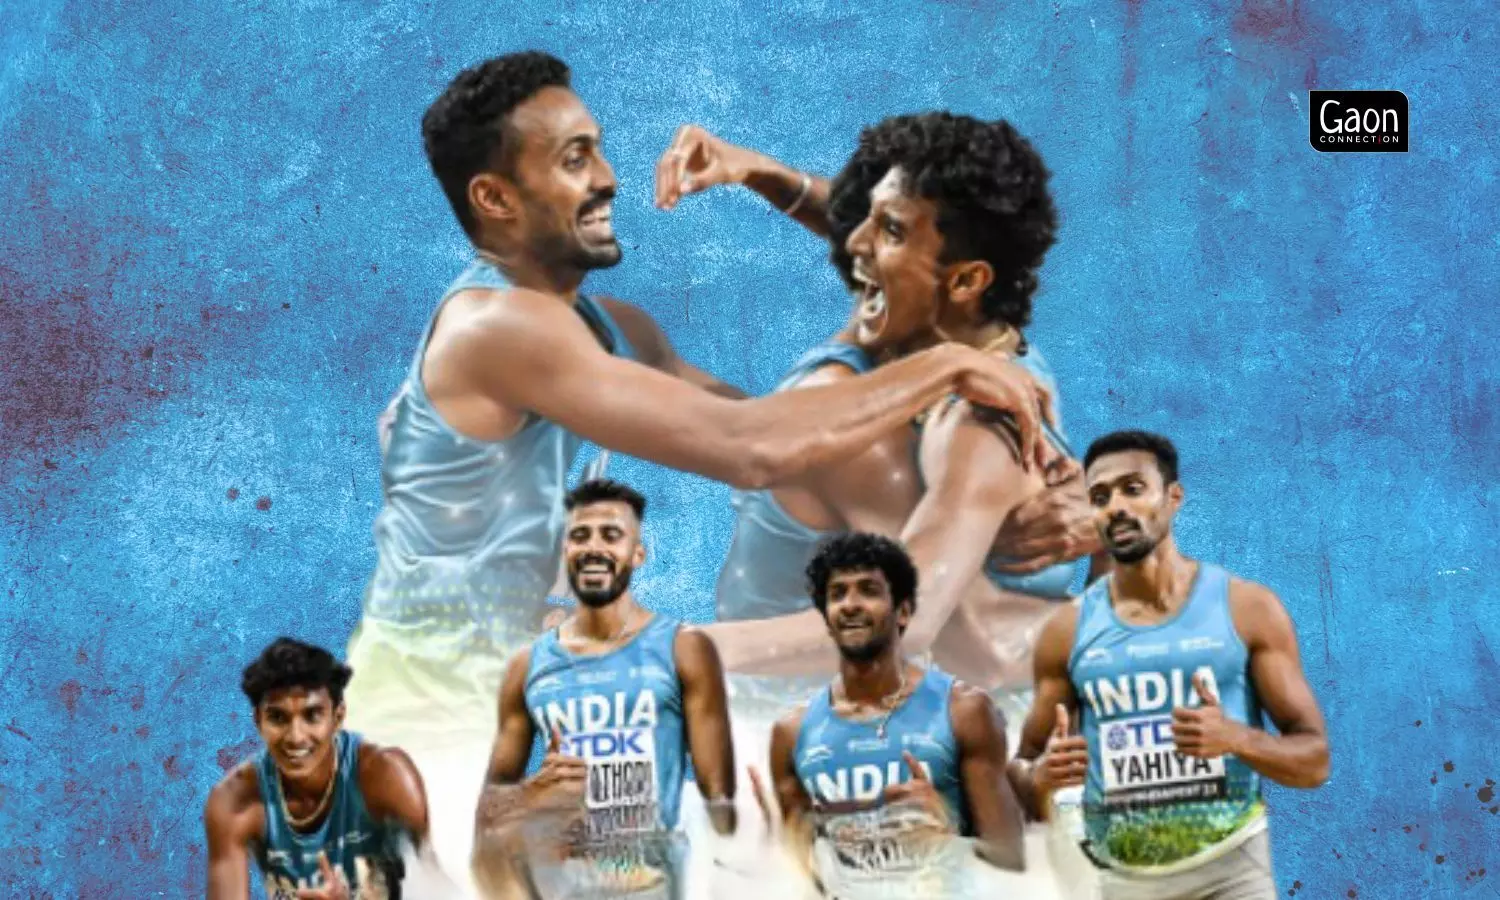 The relay squad that made India proud at the World Athletics Championships